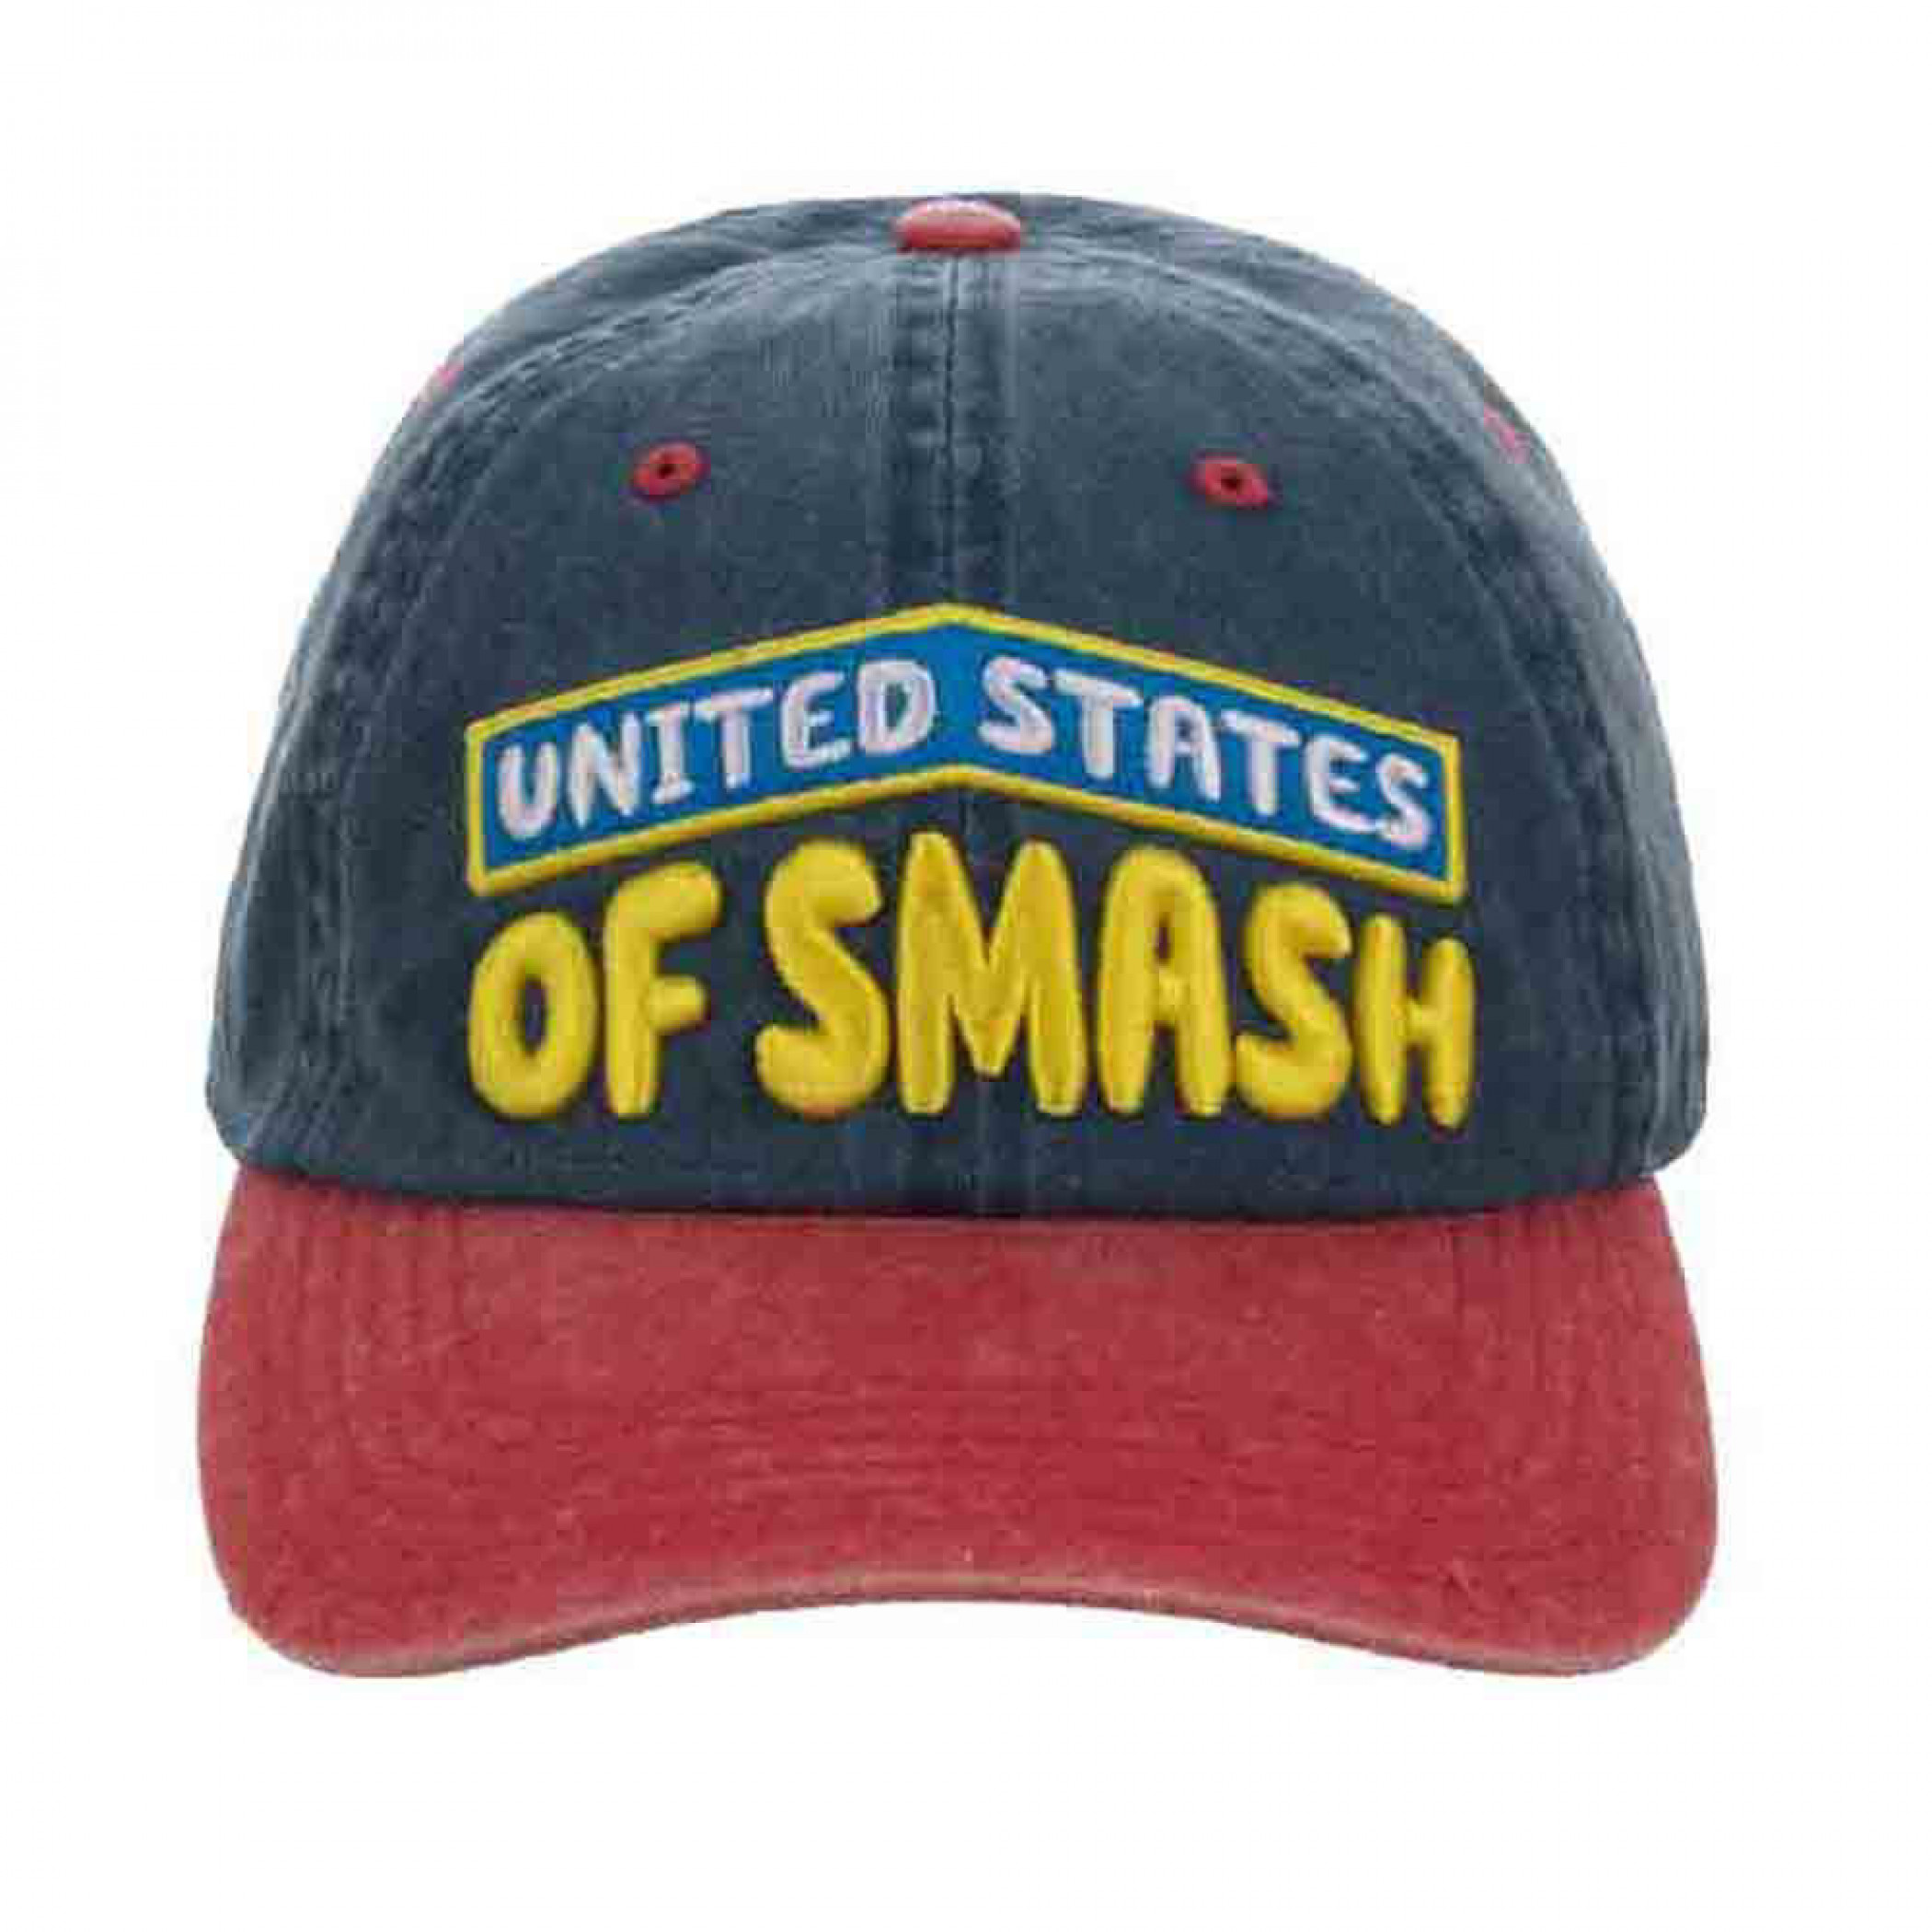 My Hero Academia All Might United States of Smash Embroidered Hat